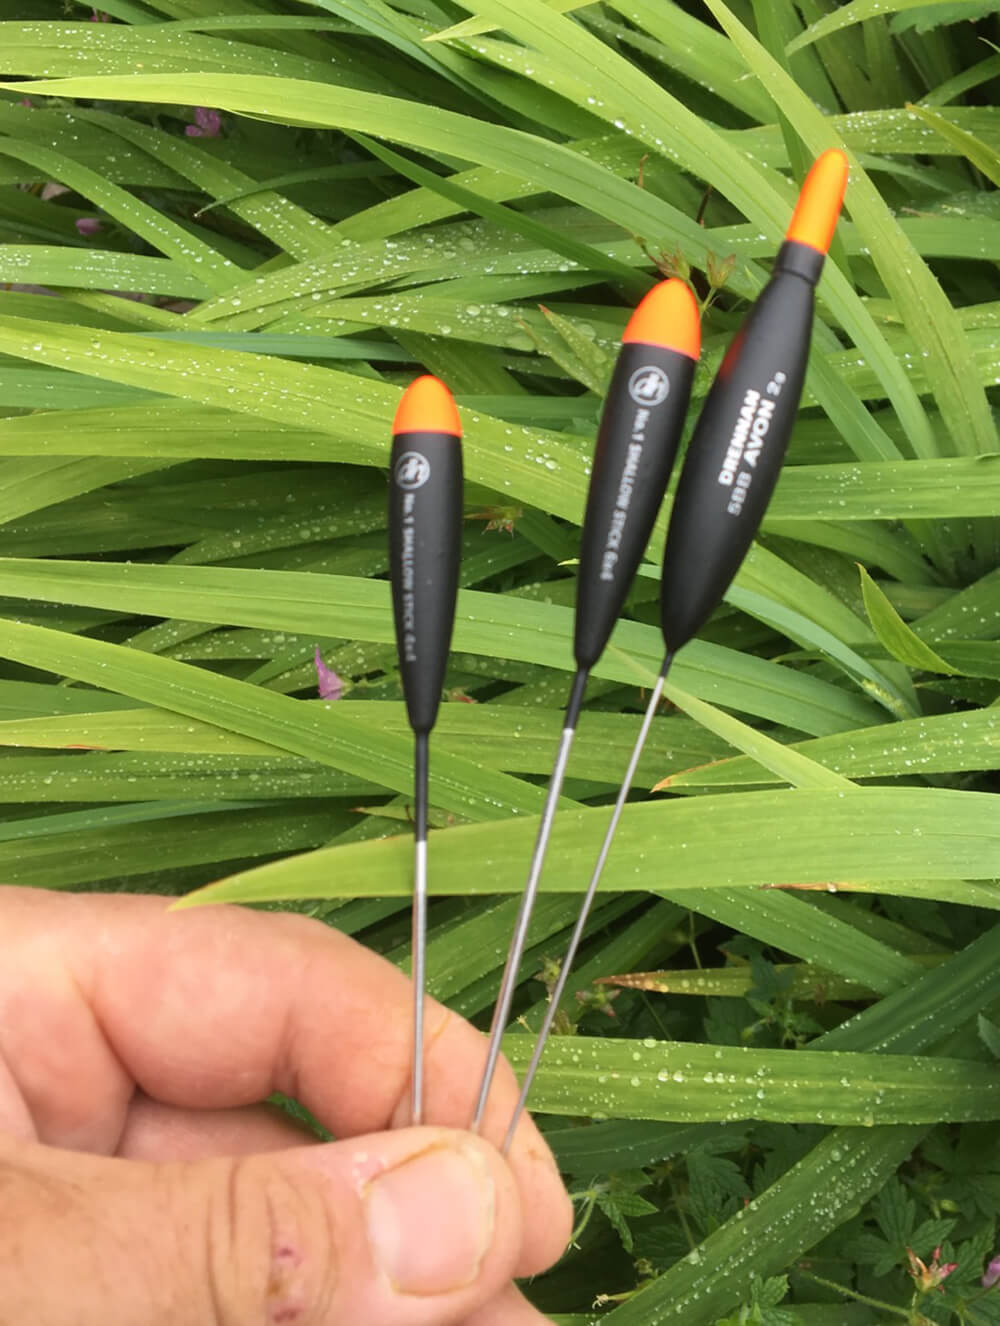 FLOATS FOR THE JOB: These DH Angling Shallow Water Sticks and Drennan Avons are perfect for turbulent, fast water pegs where big fish are the quarry.